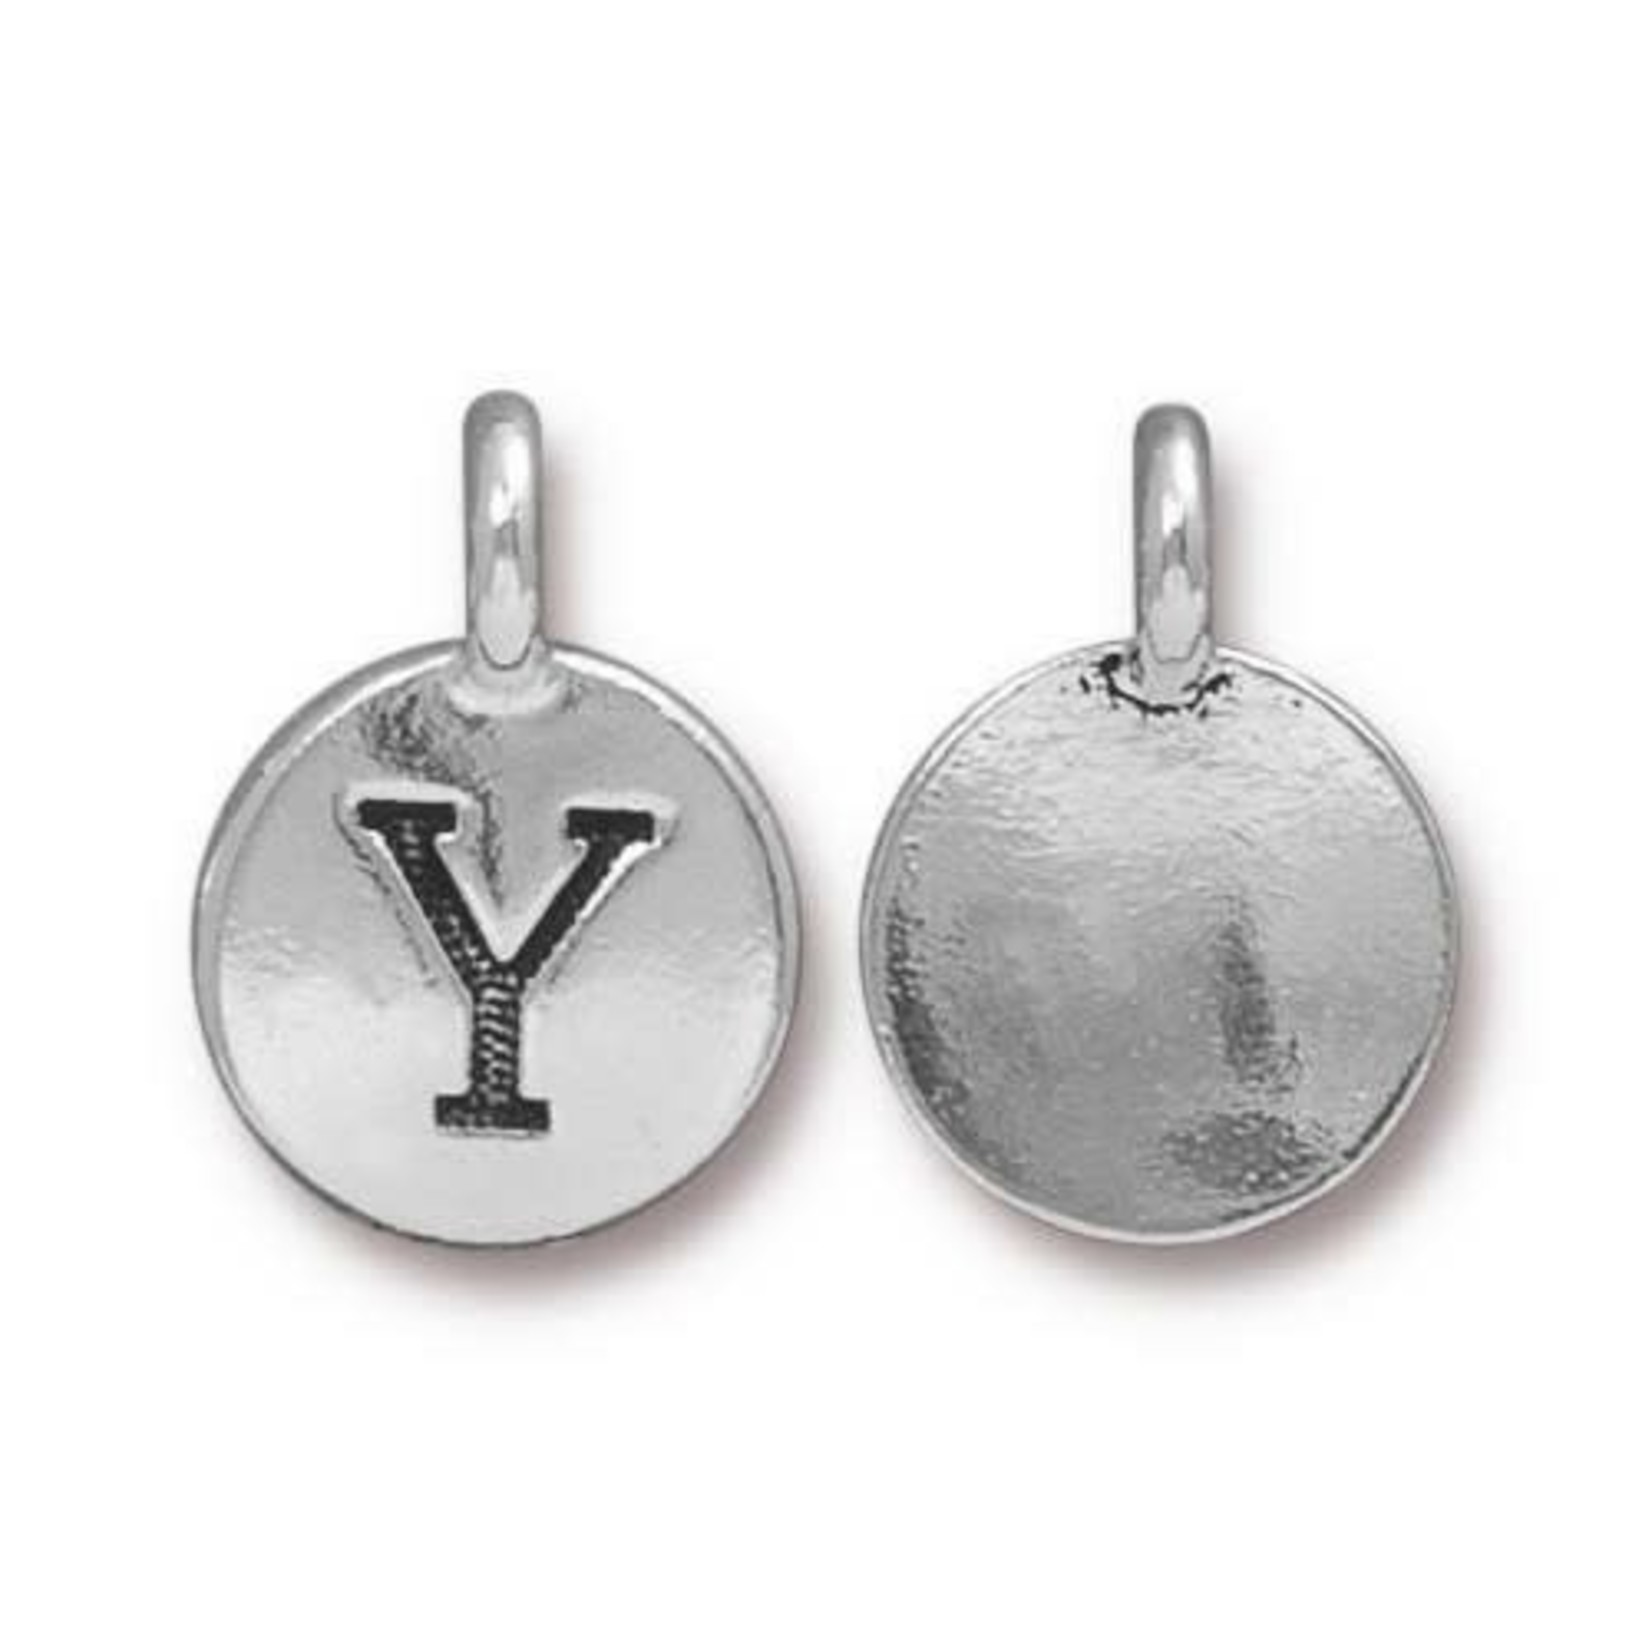 TierraCast Tierracast Antique Silver Plated Y Letter Charm